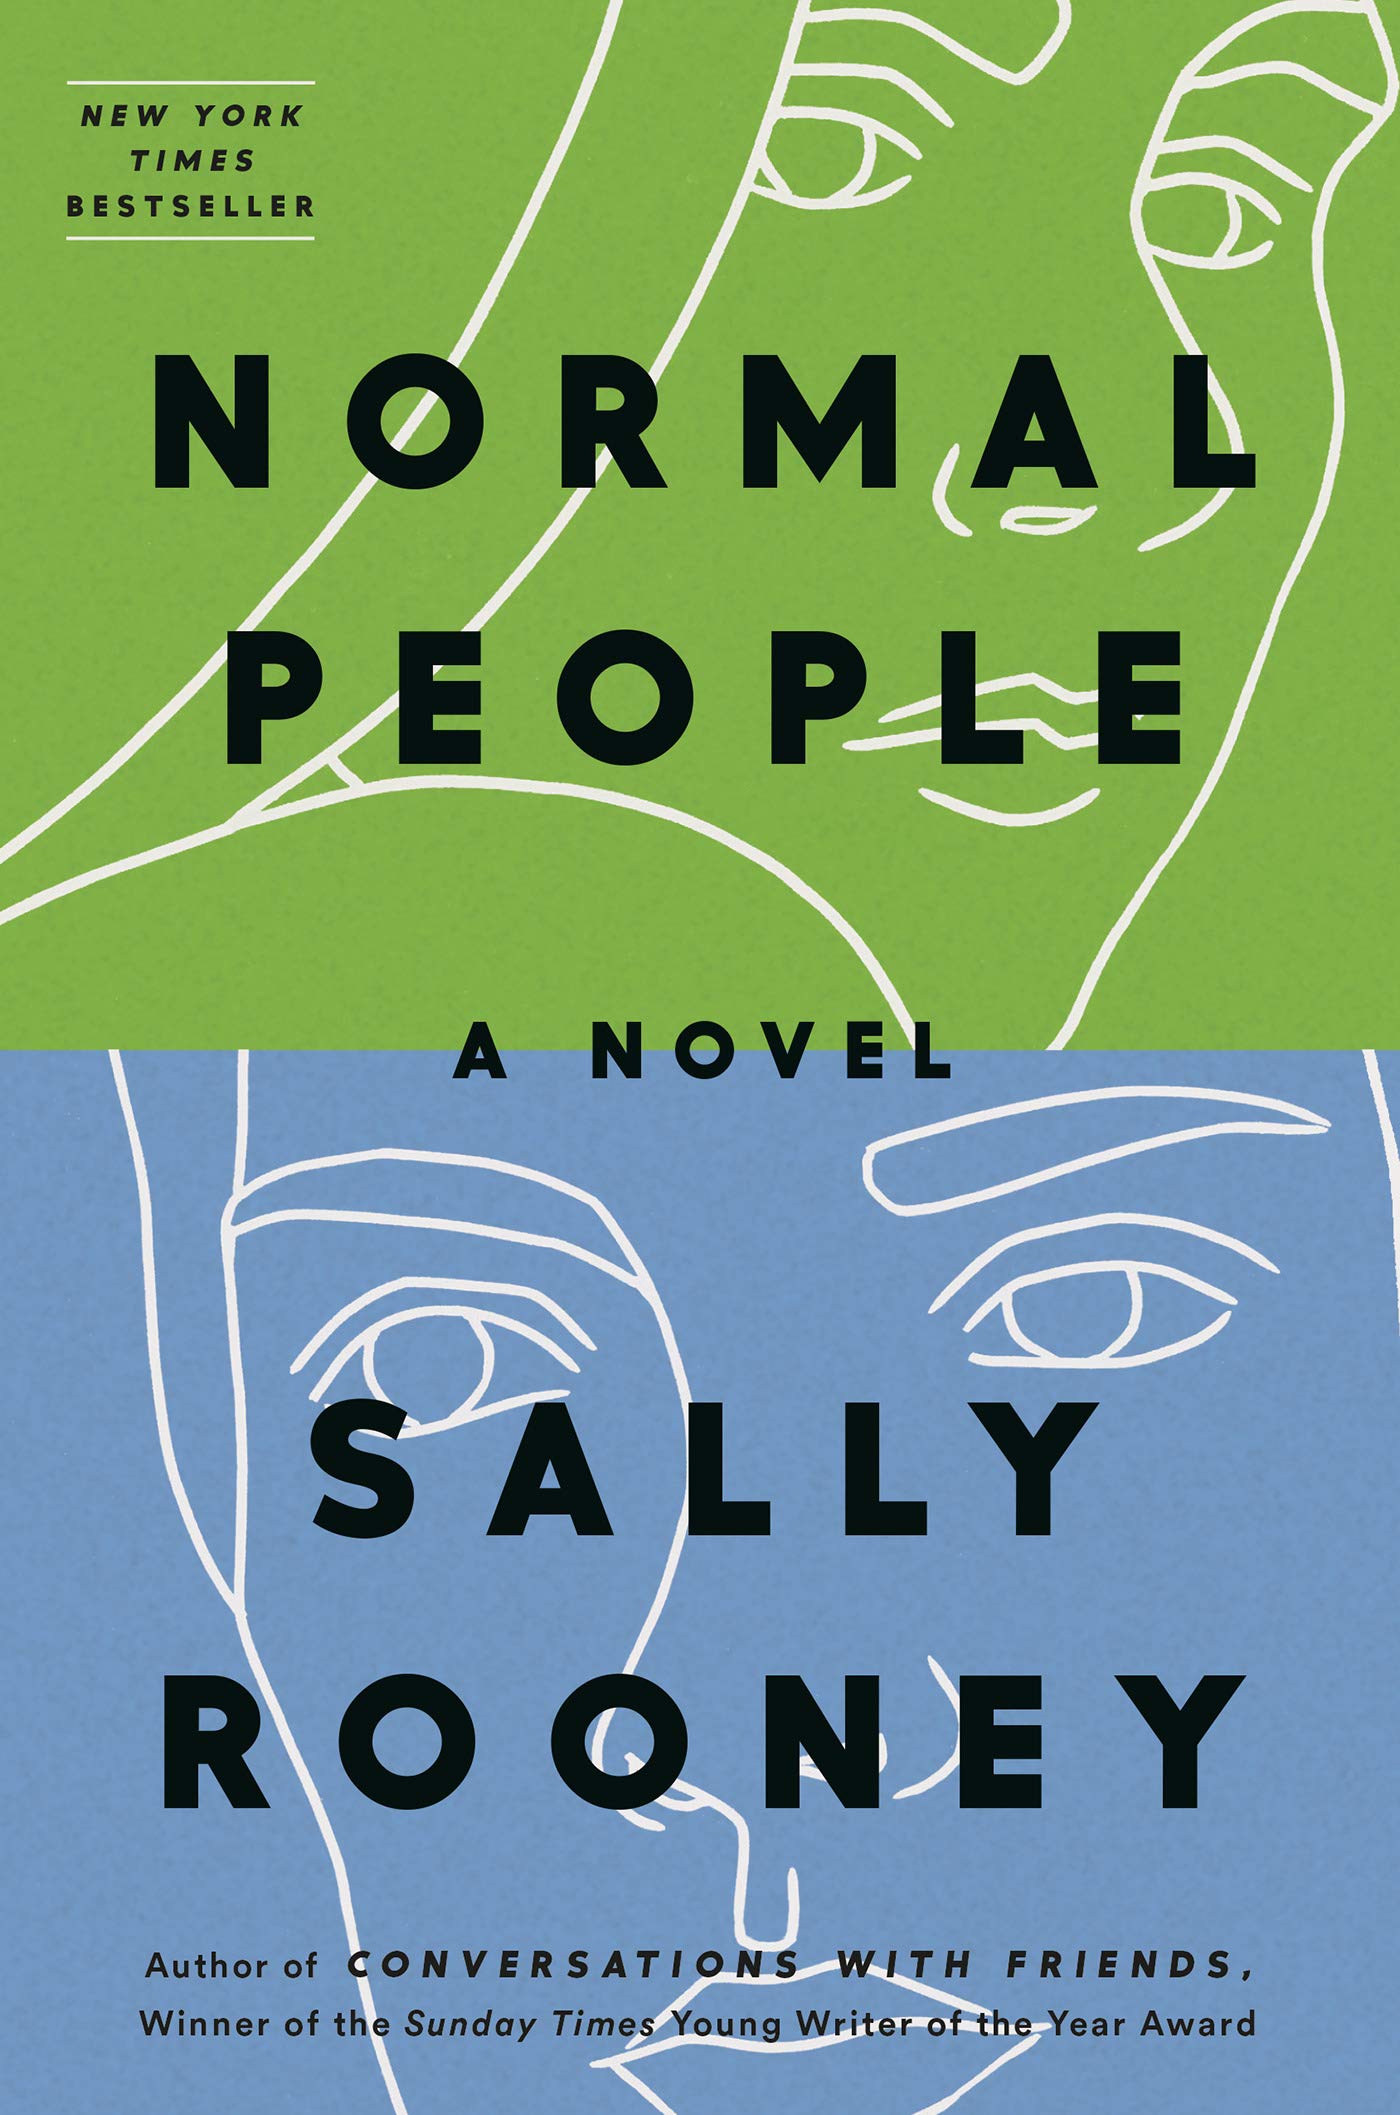 Dumbo Lit Book Club: Normal People by Sally Rooney